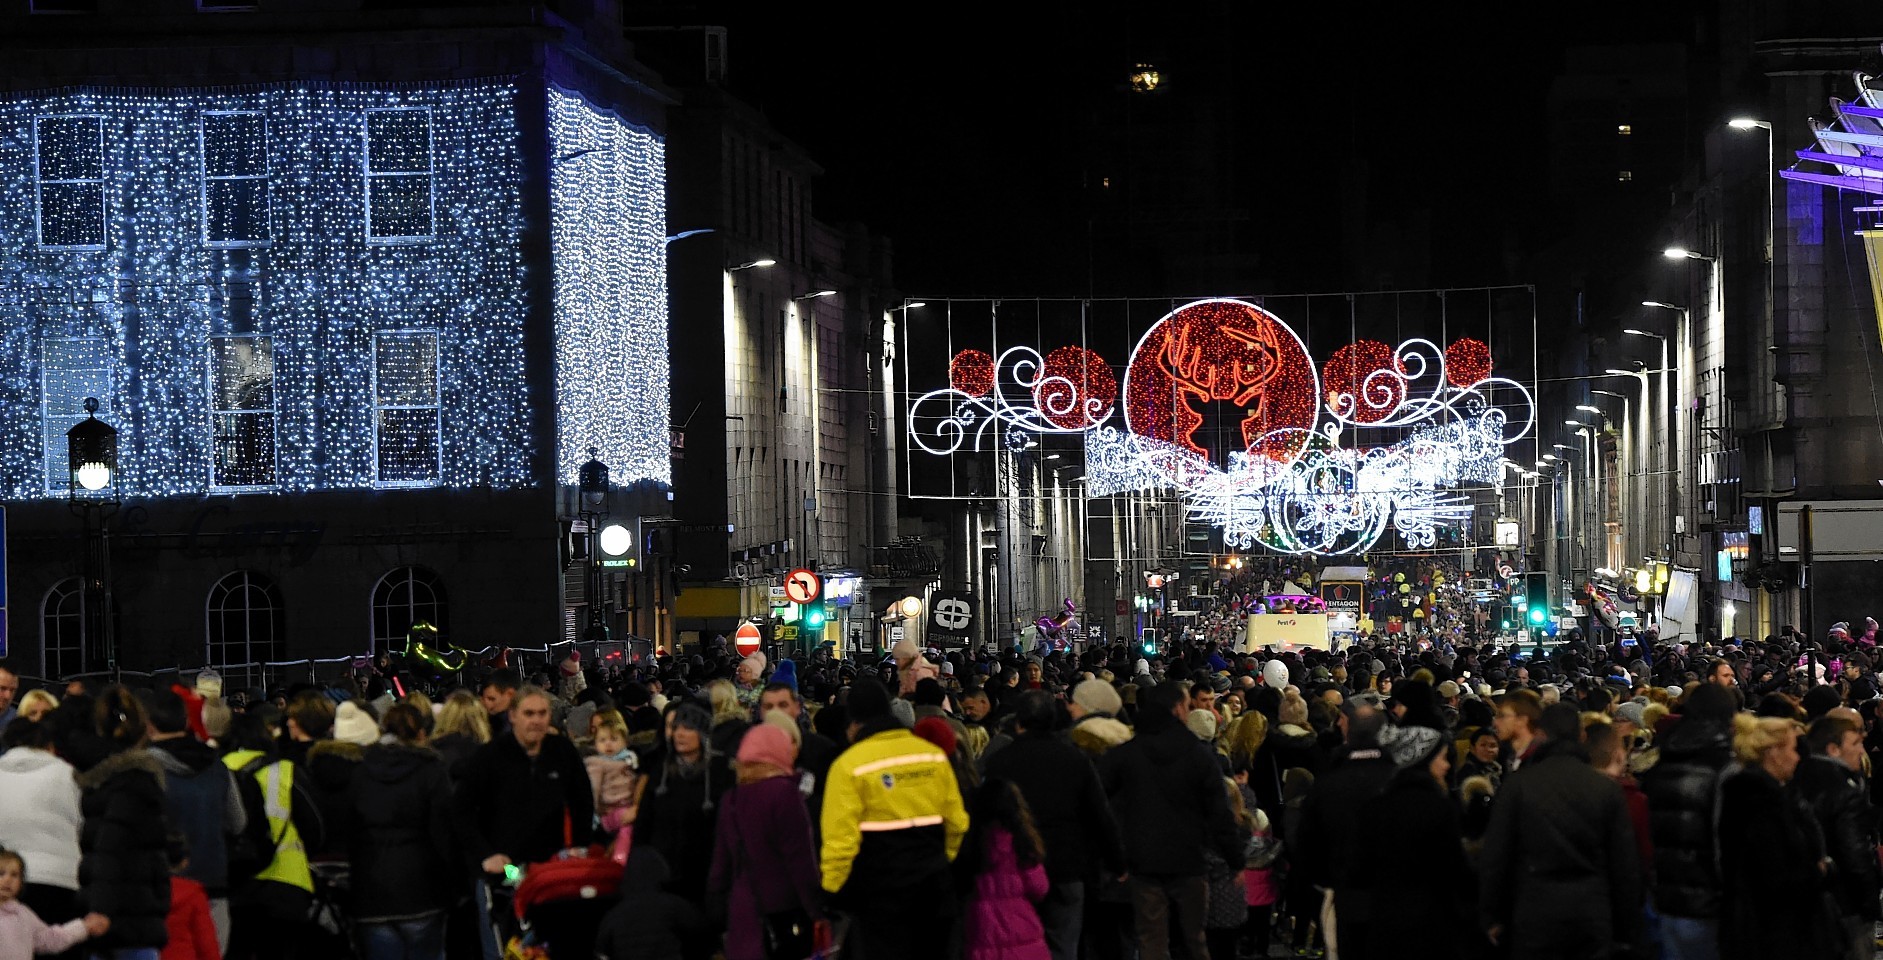 Aberdeen Christmas lights switch on parade down Union Street.